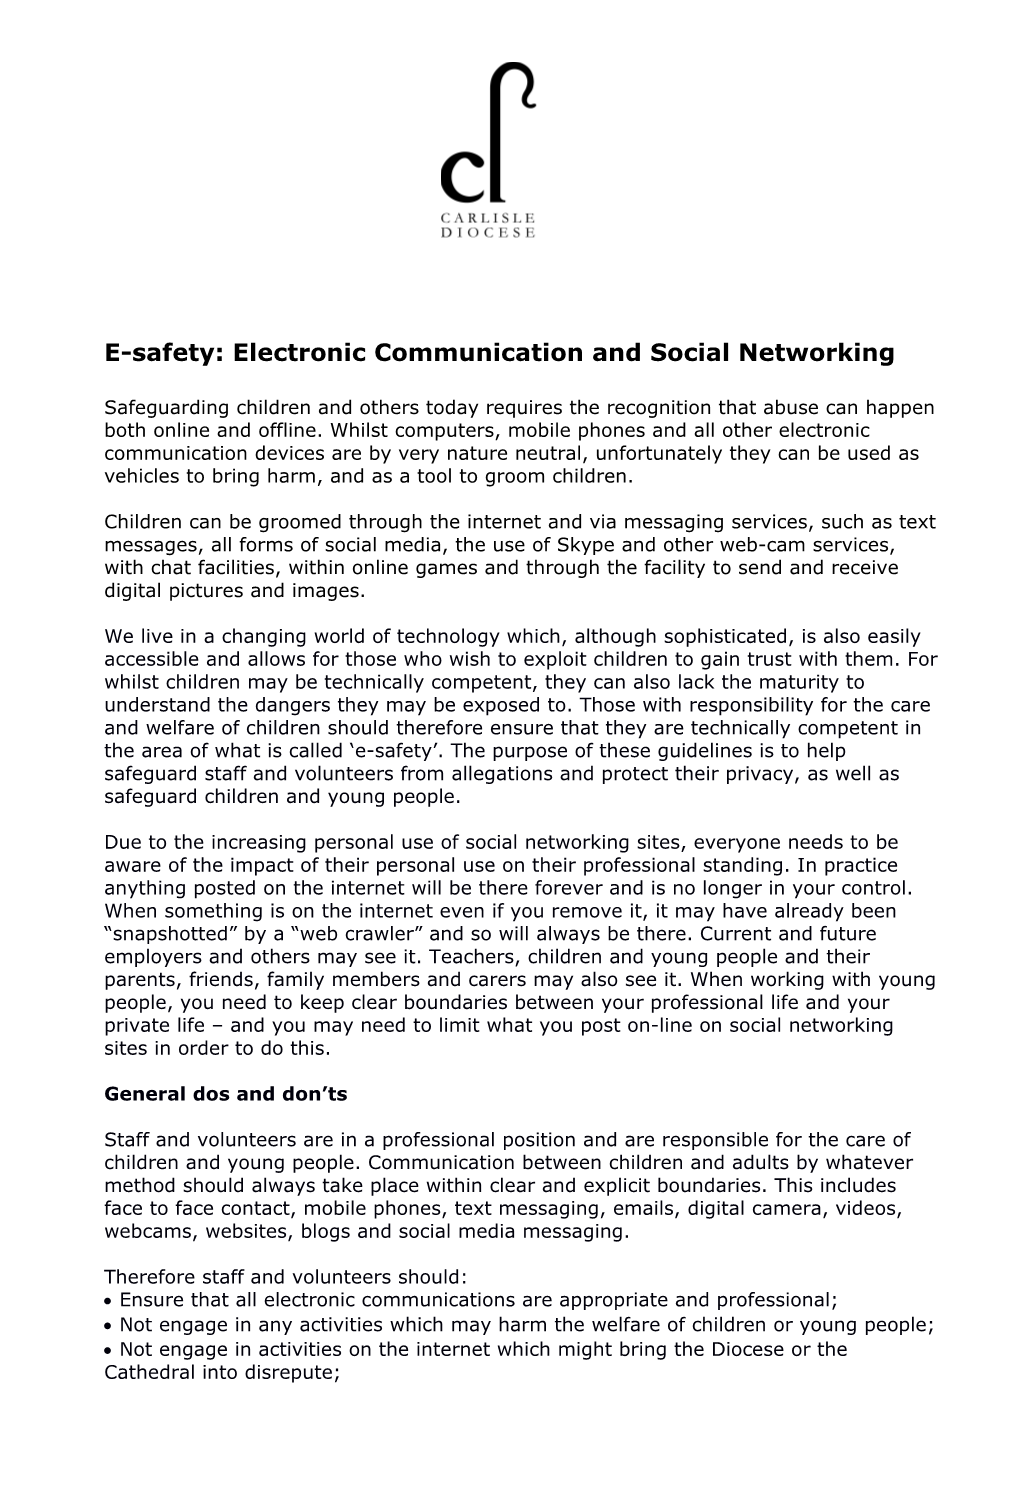 E-Safety: Electronic Communication and Social Networking